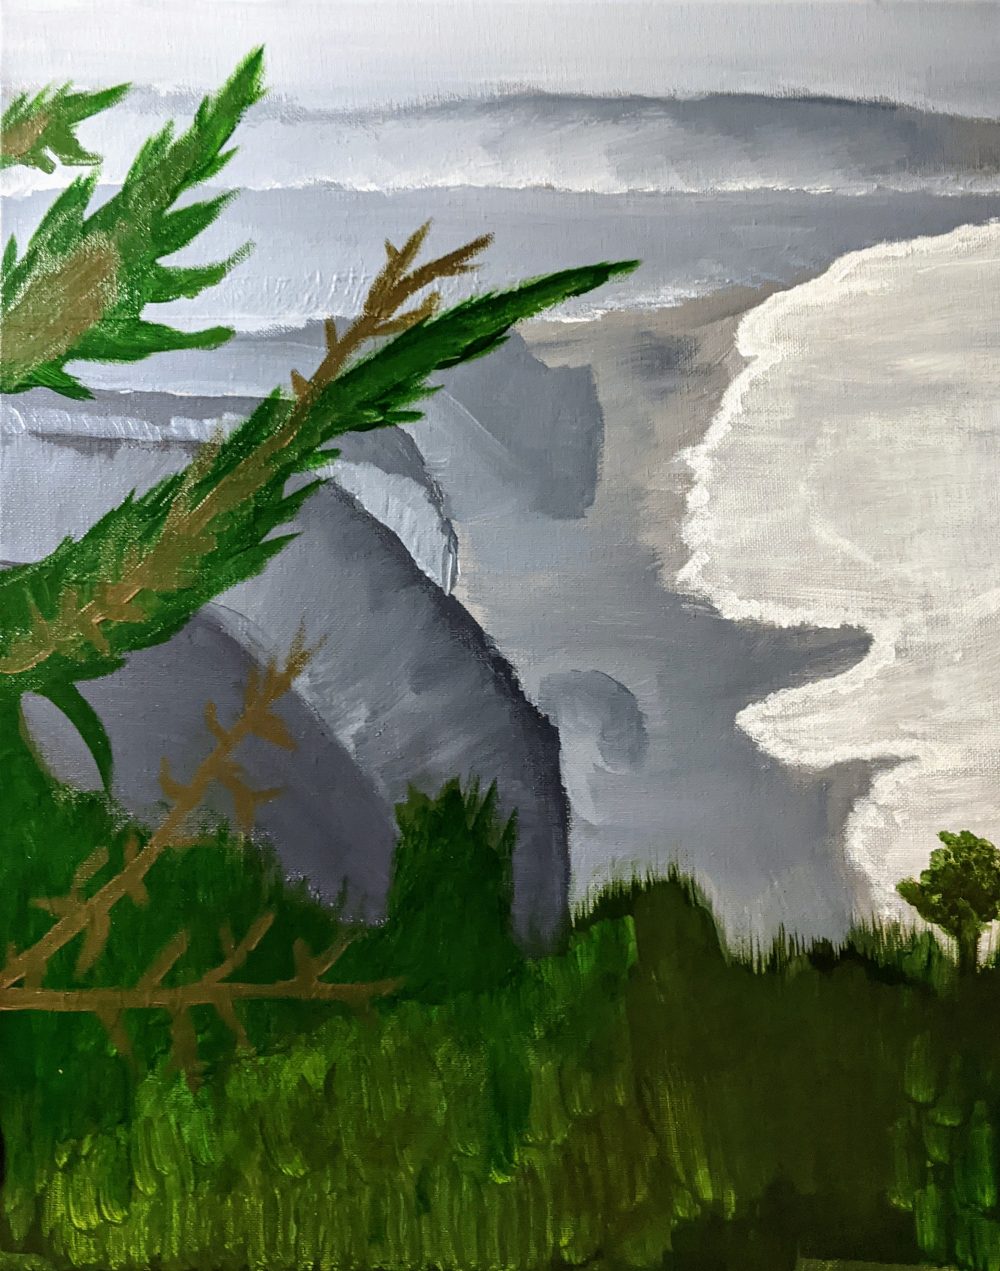 An acrylic painting of the ocean and mountains as seen from behind a plant.